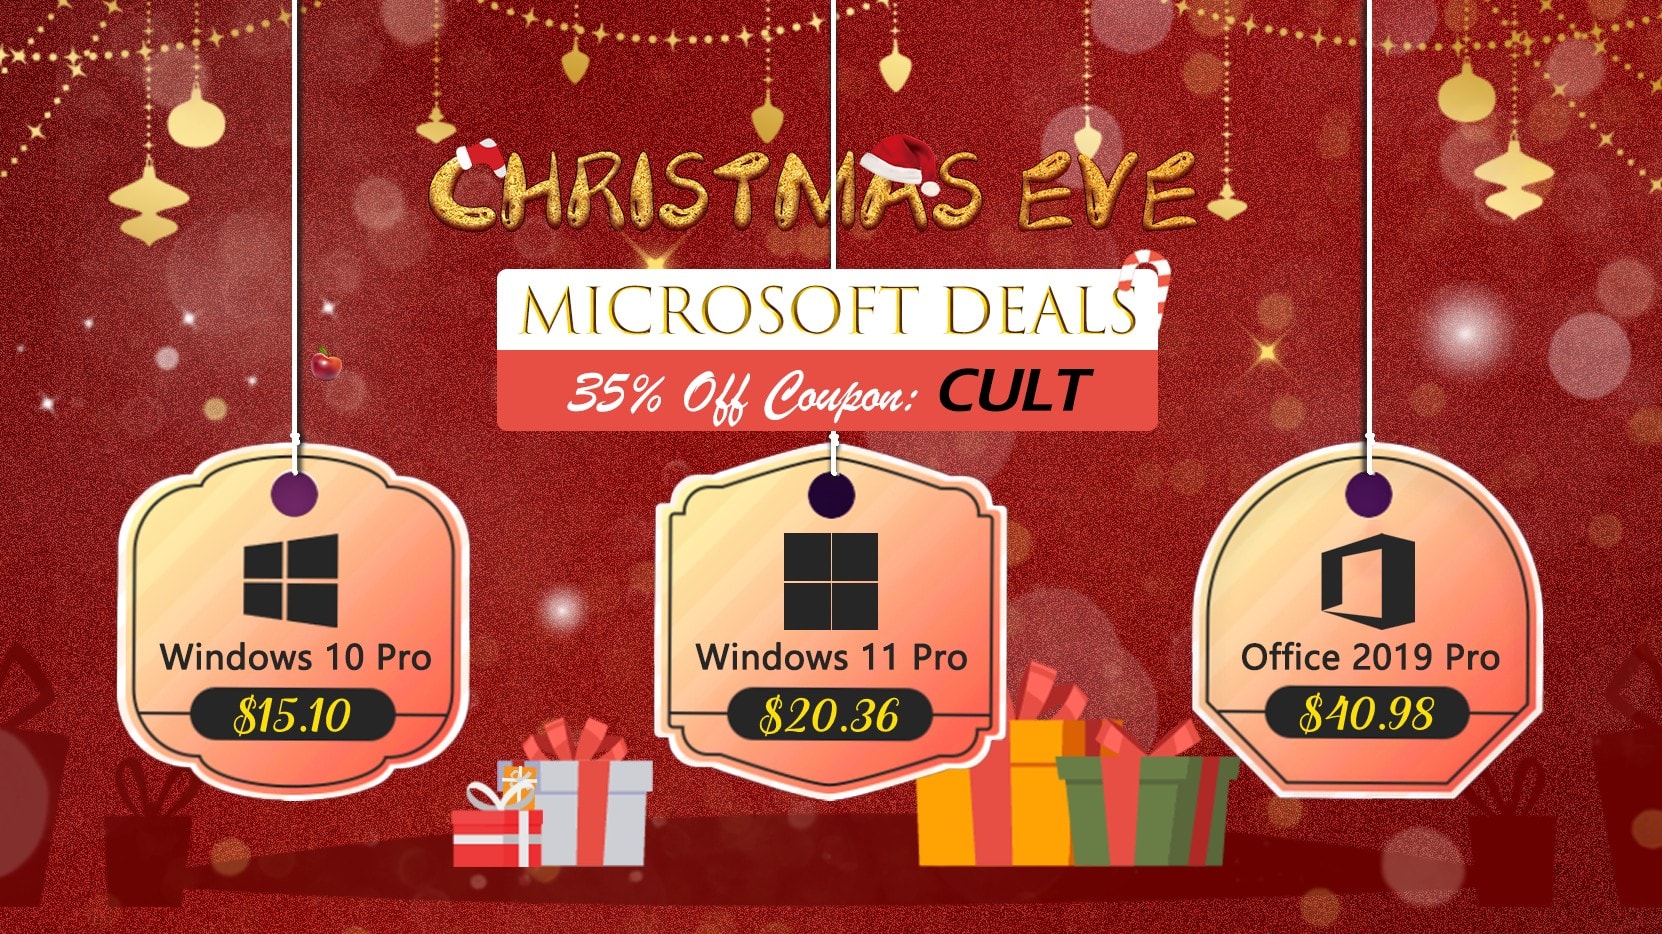 During CdkeySales.com's Christmas Sale, you can get 35% off with coupon code CULT.